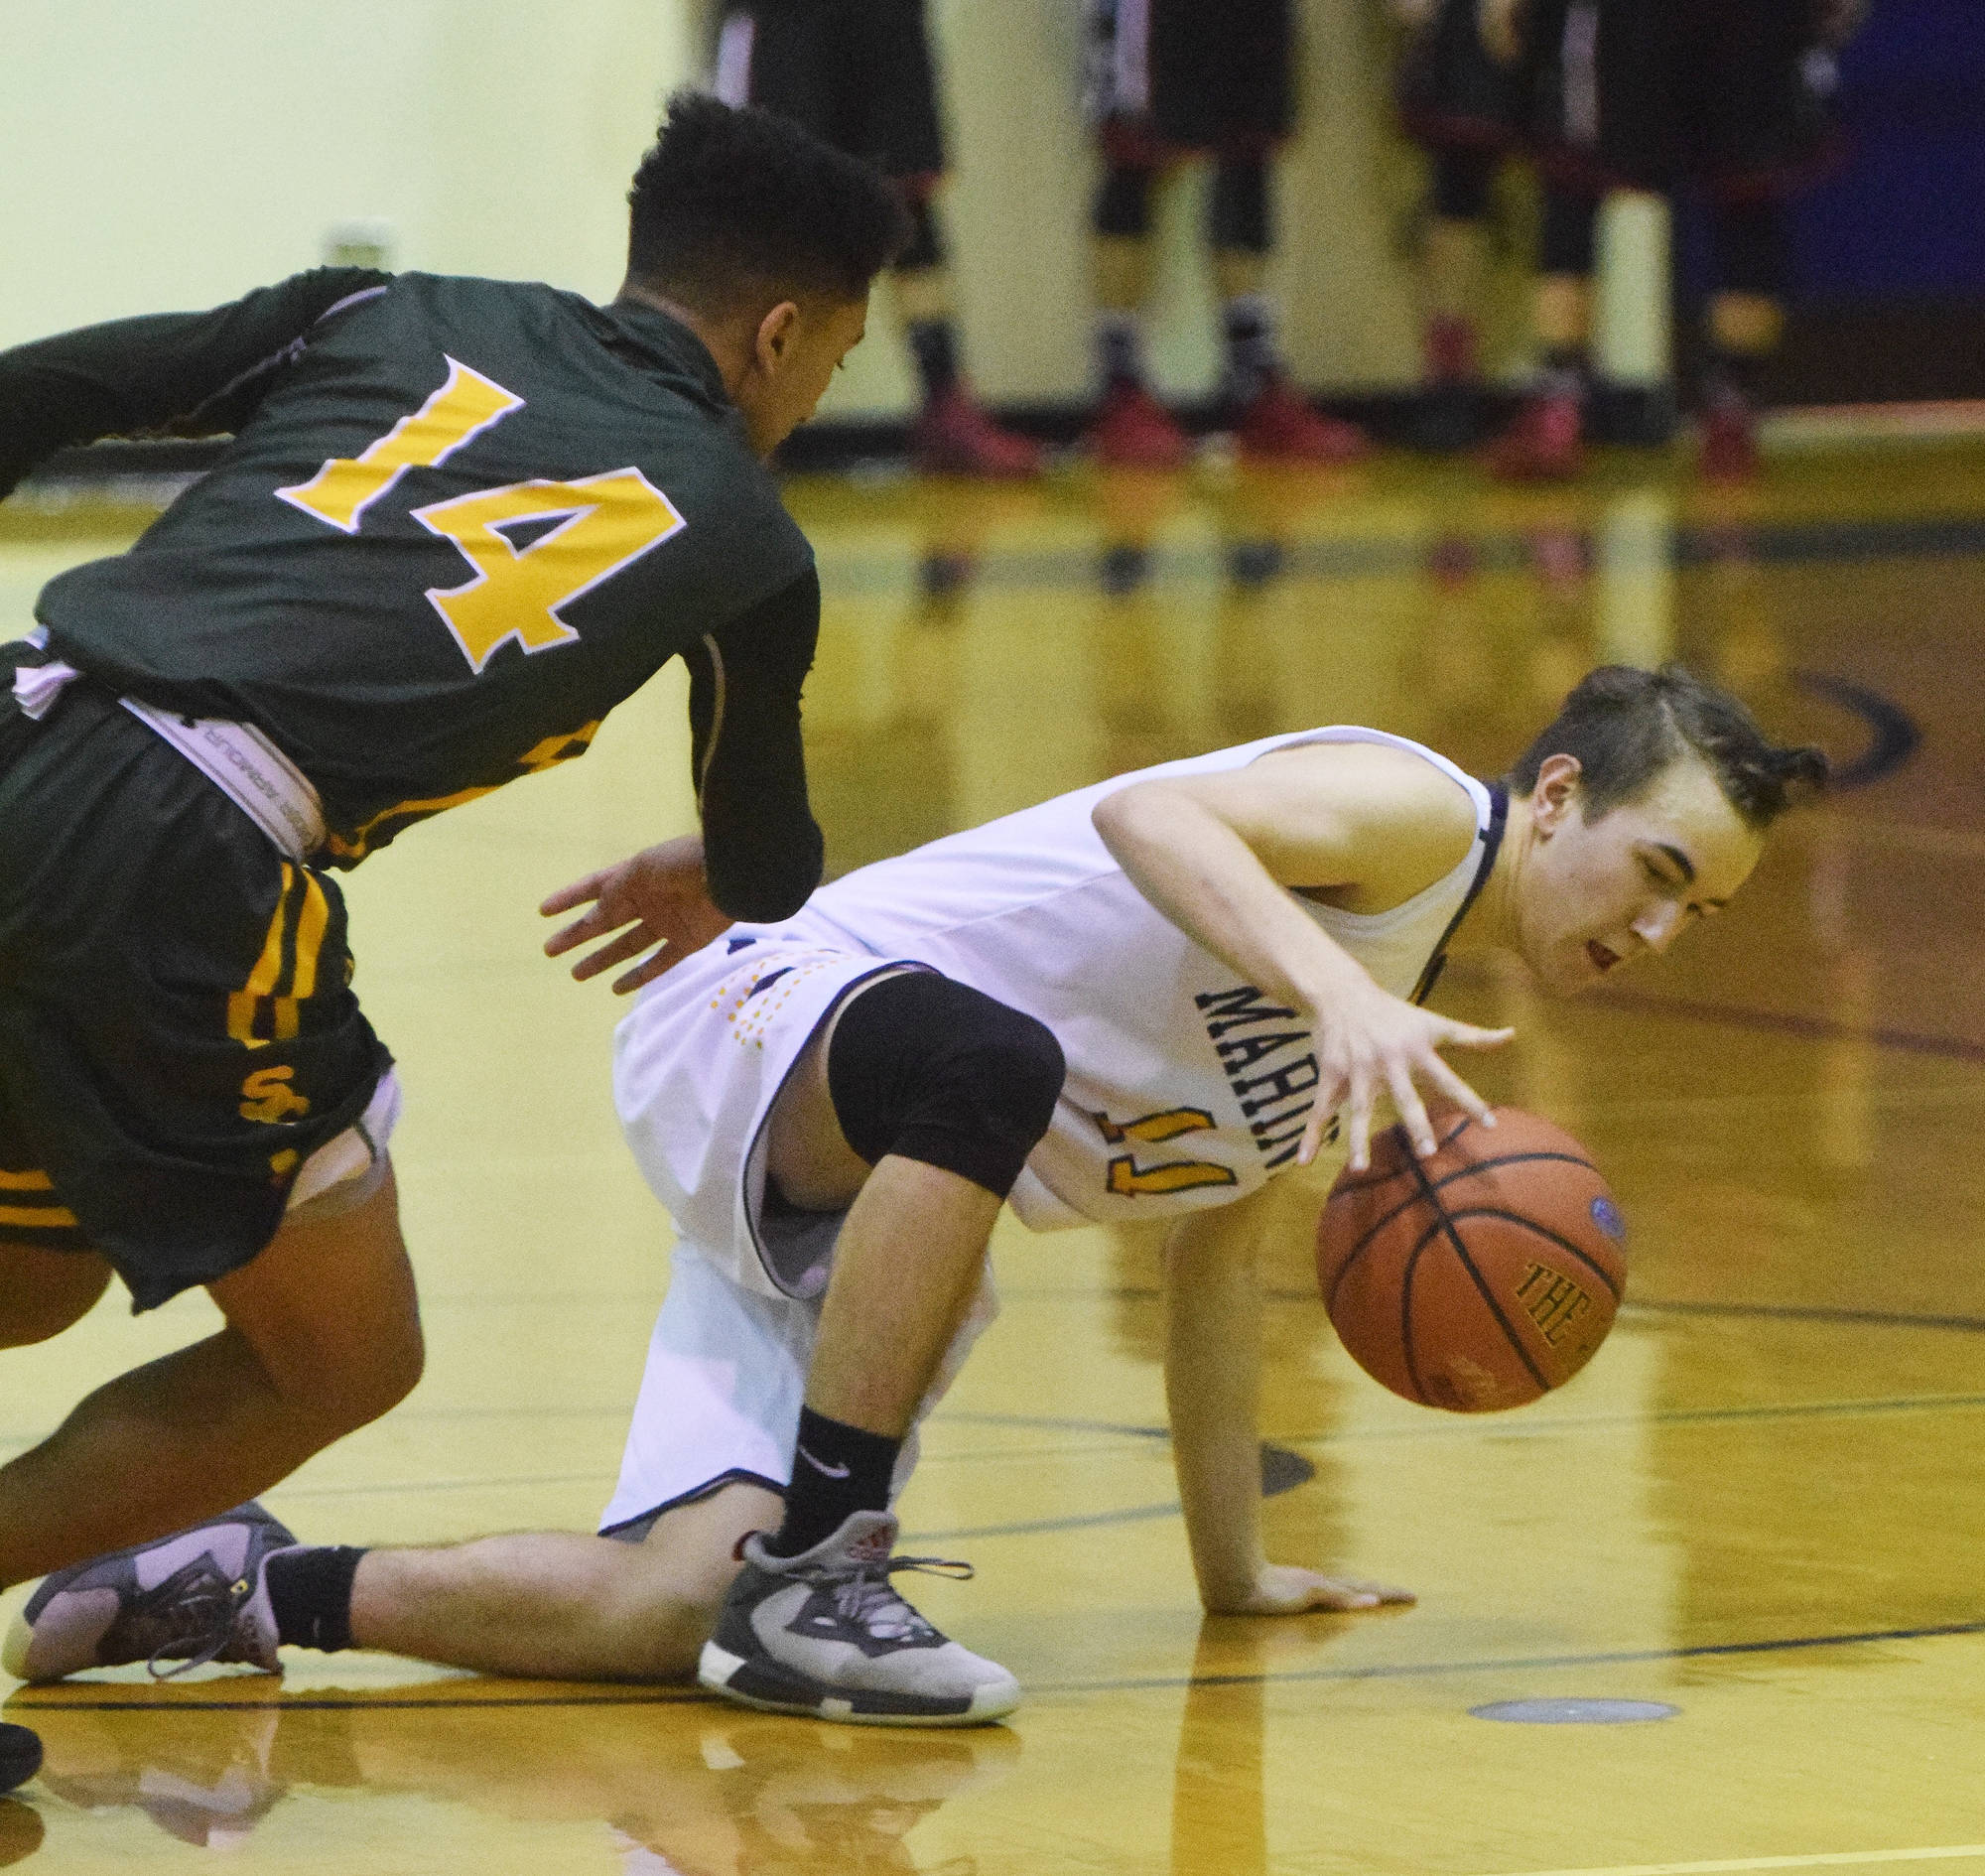 Homer’s Daniel Reutov slips while dribbling the ball with pressure from Service’s Brandon Gail (14) Friday at the Powerade/Al Howard Tip-Off tournament at Soldotna High School. (Photo by Joey Klecka/Peninsula Clarion)